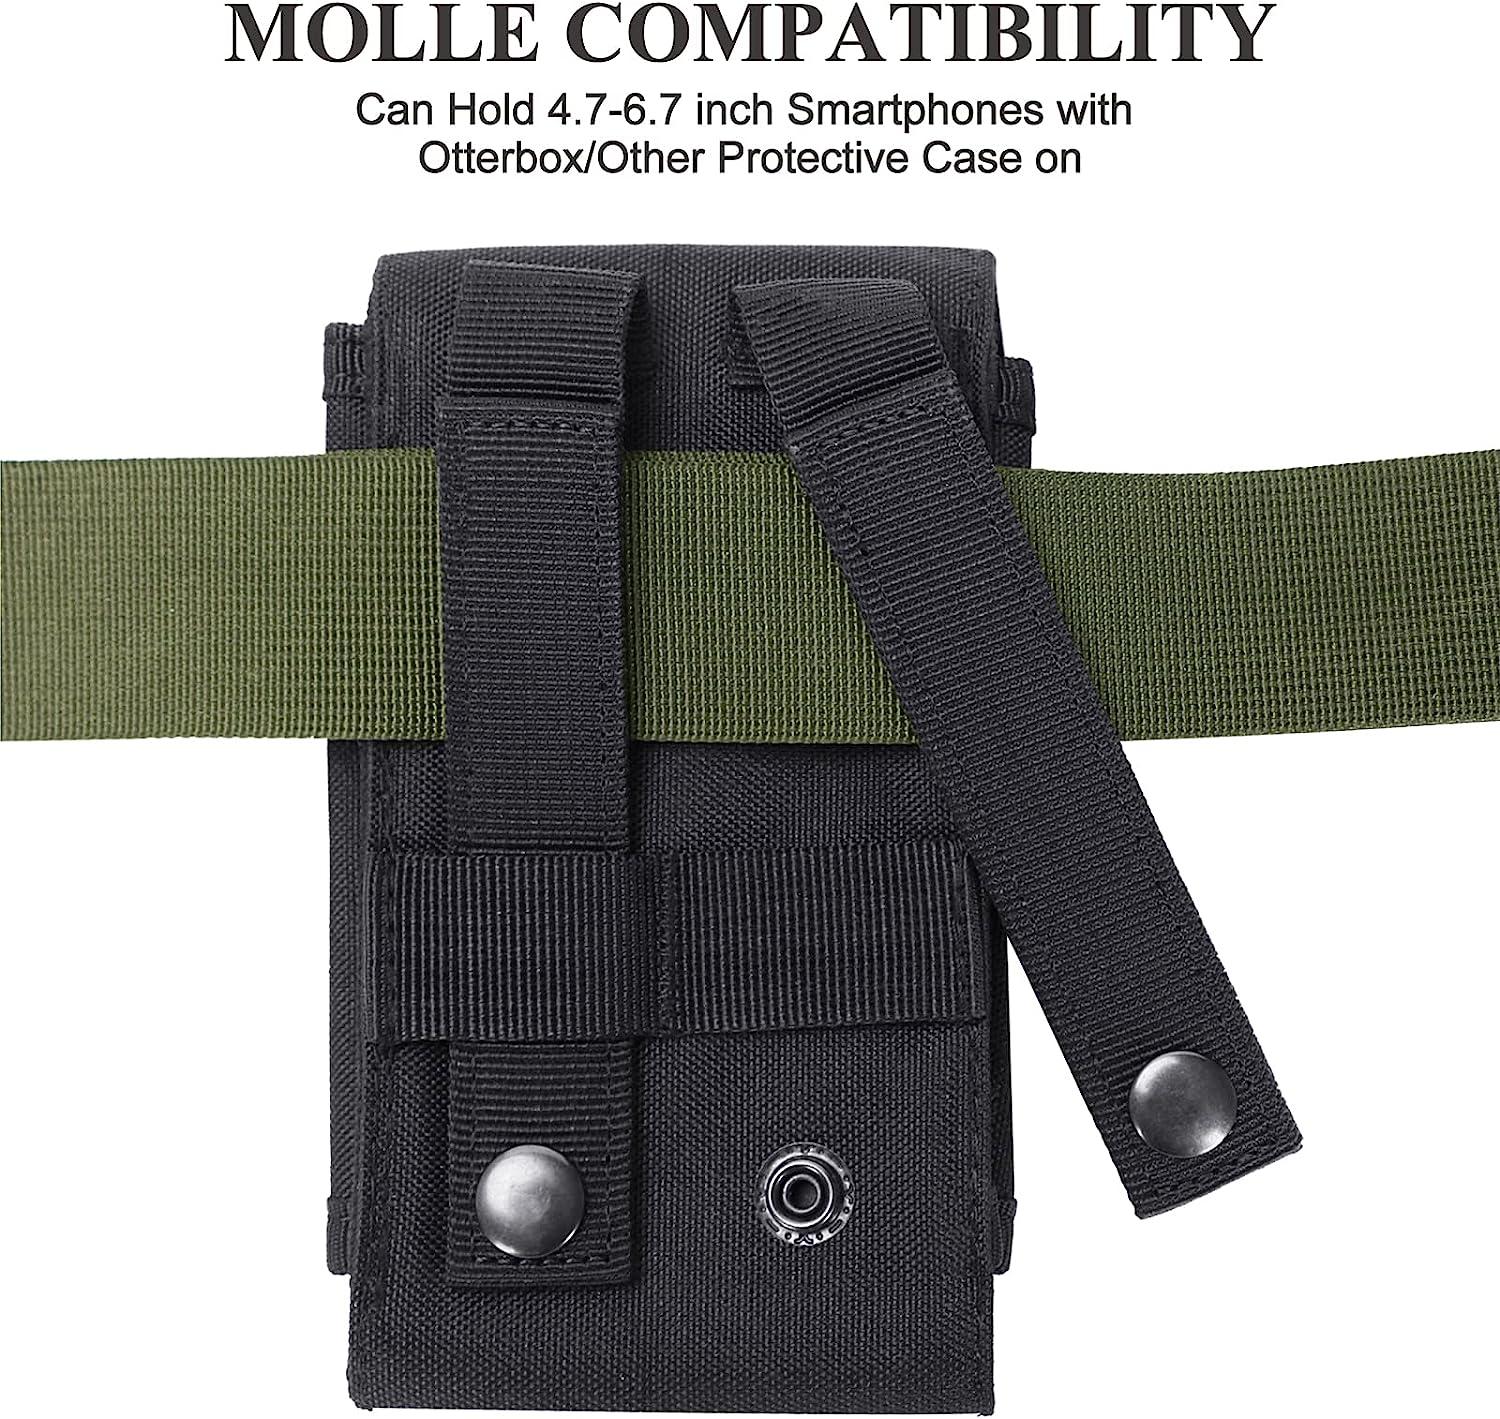 Molle Attachment Belt Holder Waist Pouch - China Tactical Phone Bag and  Waist Pouc price